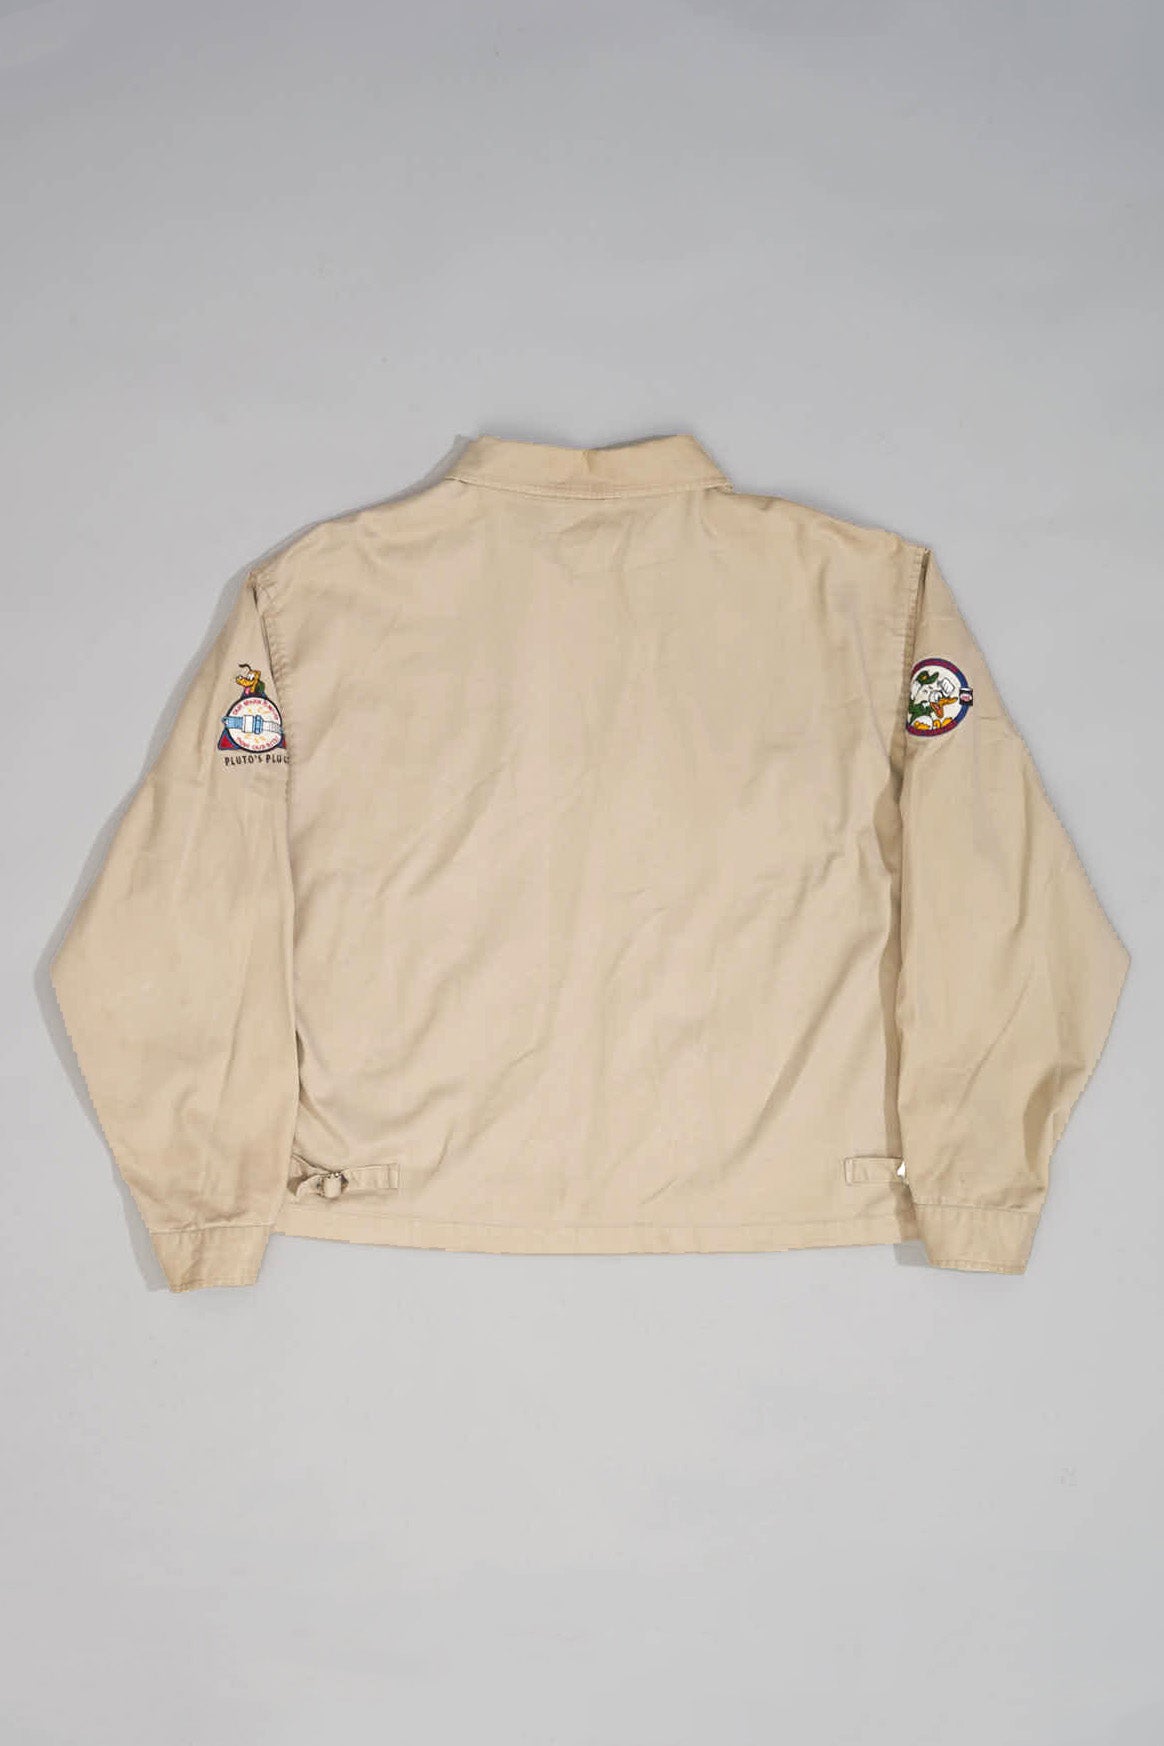 GAS & GREASE MICKEY WORKERS Jacket - XL